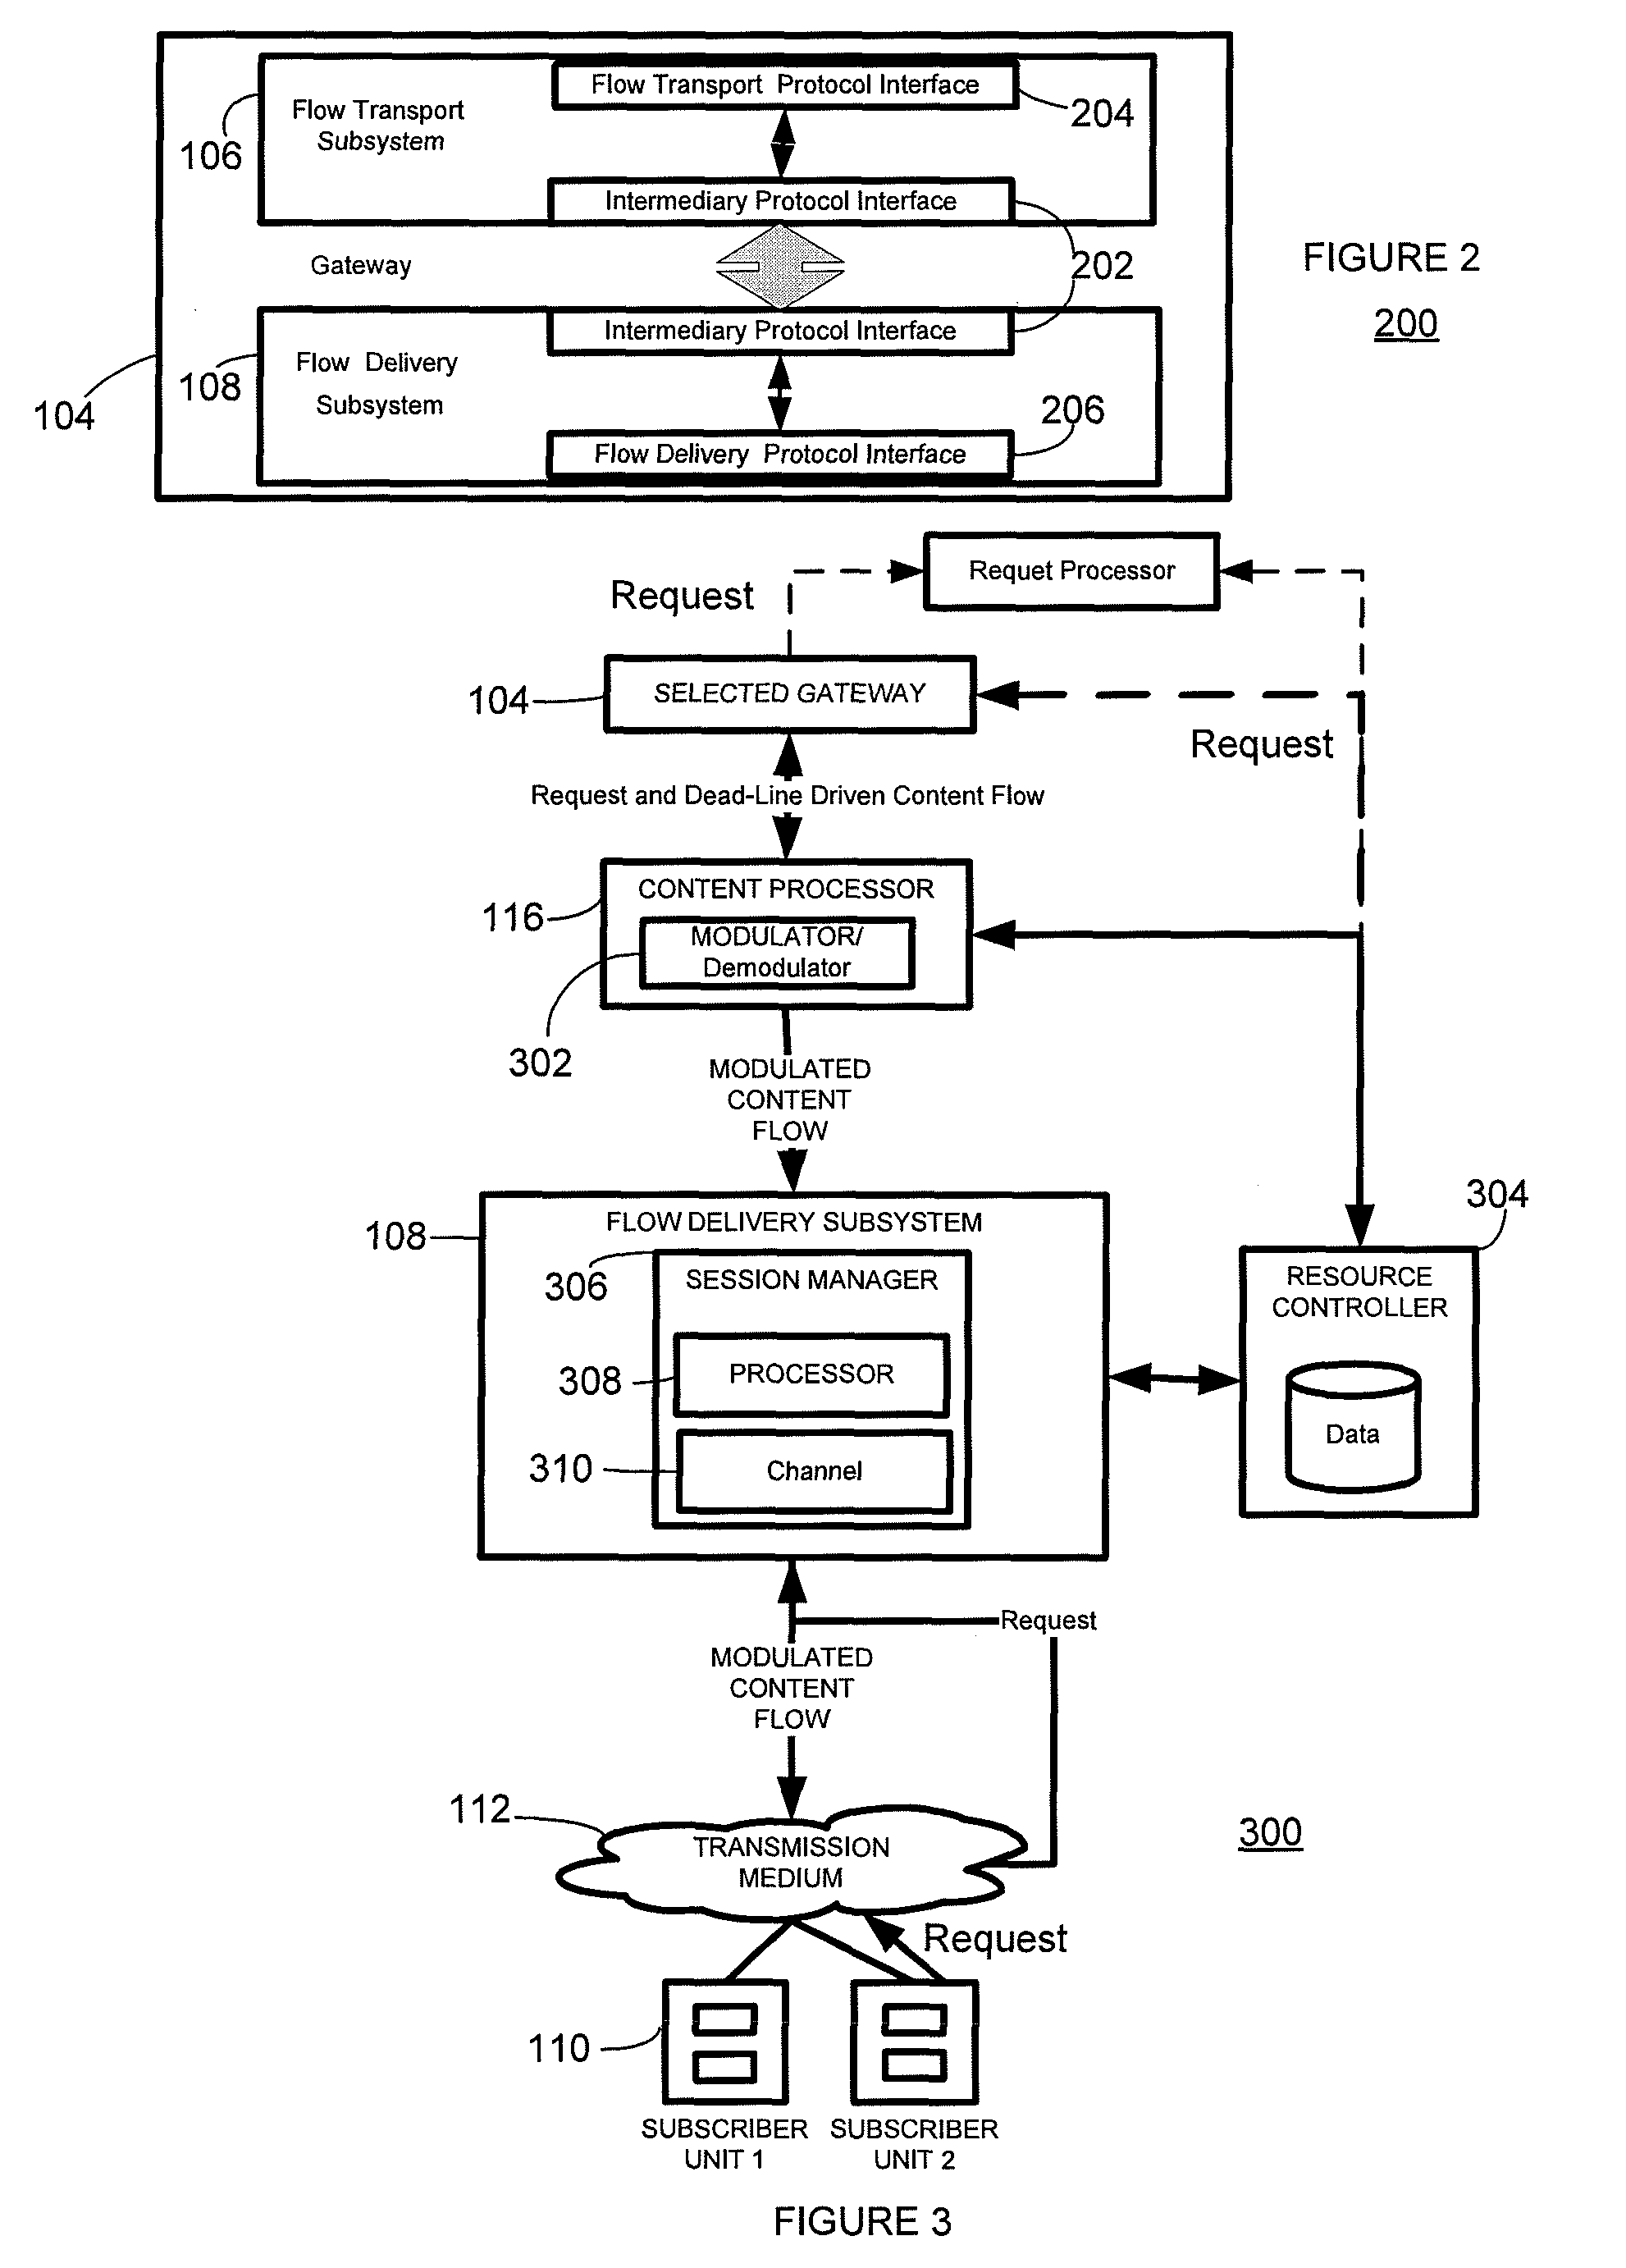 Method for delivery of deadline-driven content flows over a flow transport system that interfaces with a flow delivery system via a selected gateway